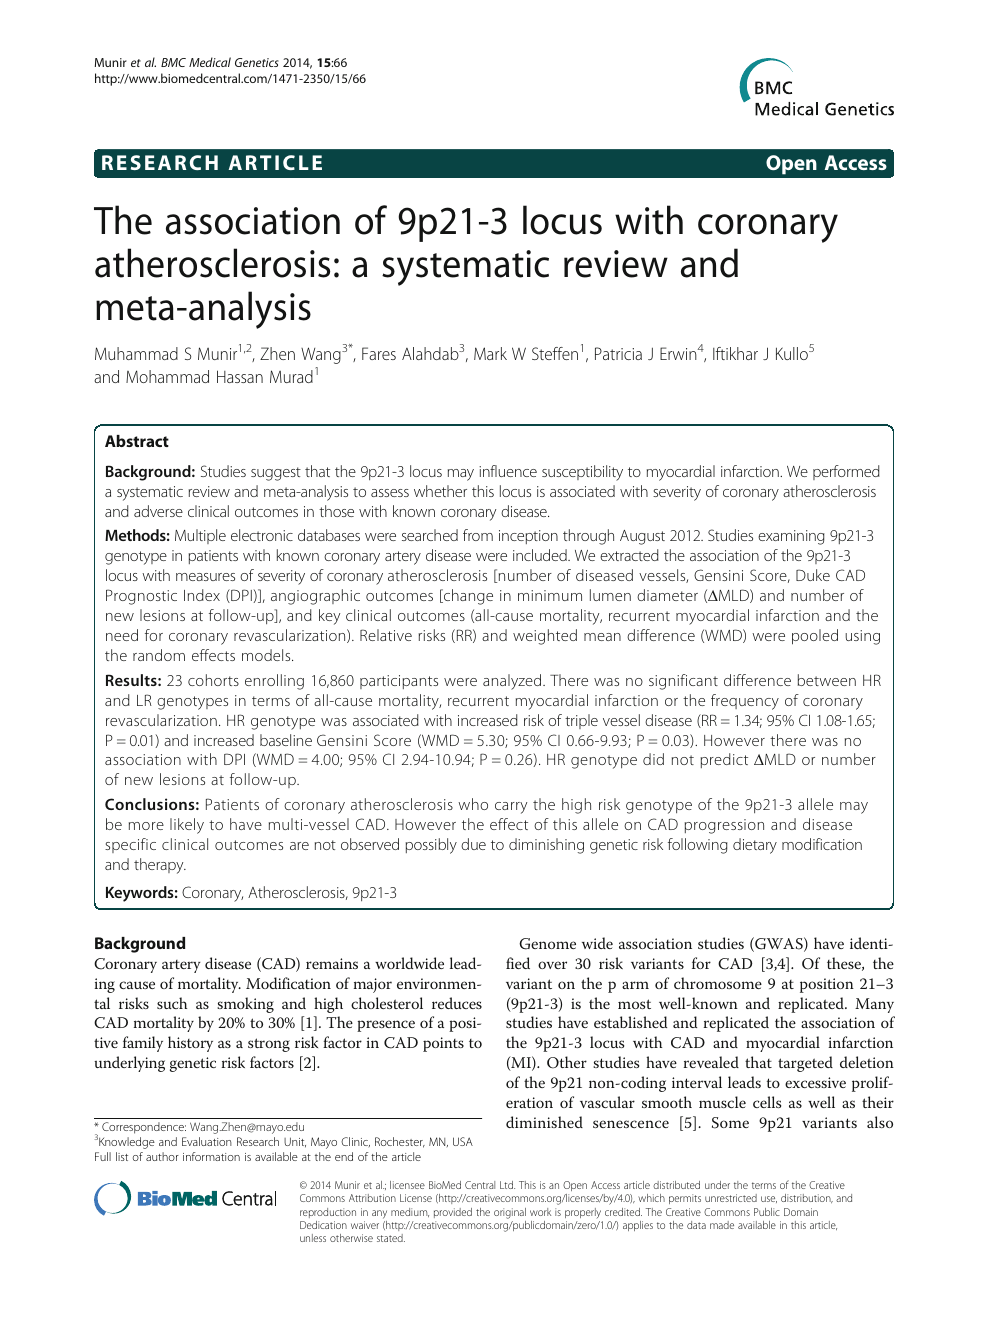 The Association Of 9p21 3 Locus With Coronary Atherosclerosis A Systematic Review And Meta Analysis Topic Of Research Paper In Health Sciences Download Scholarly Article Pdf And Read For Free On Cyberleninka Open